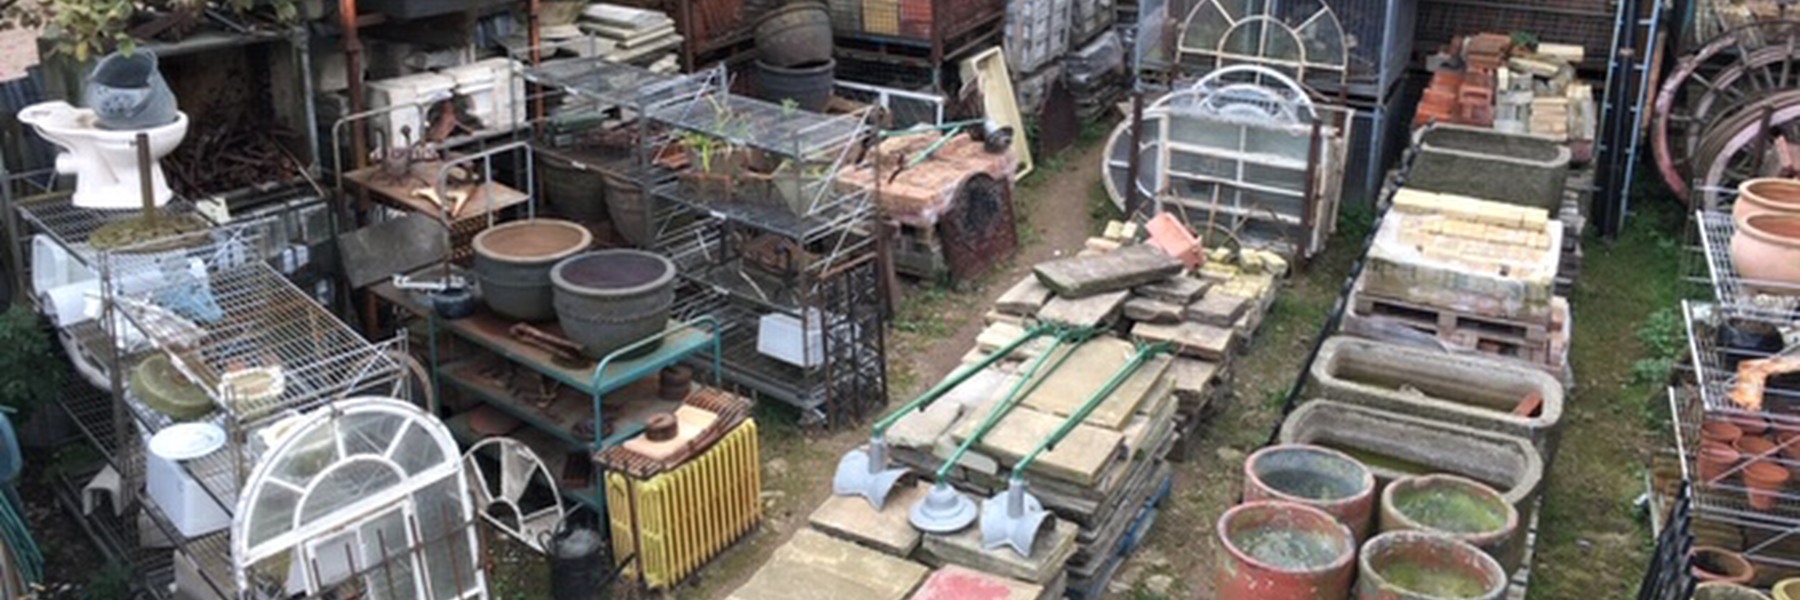 treesave reclamation yard with period building materials suffolk